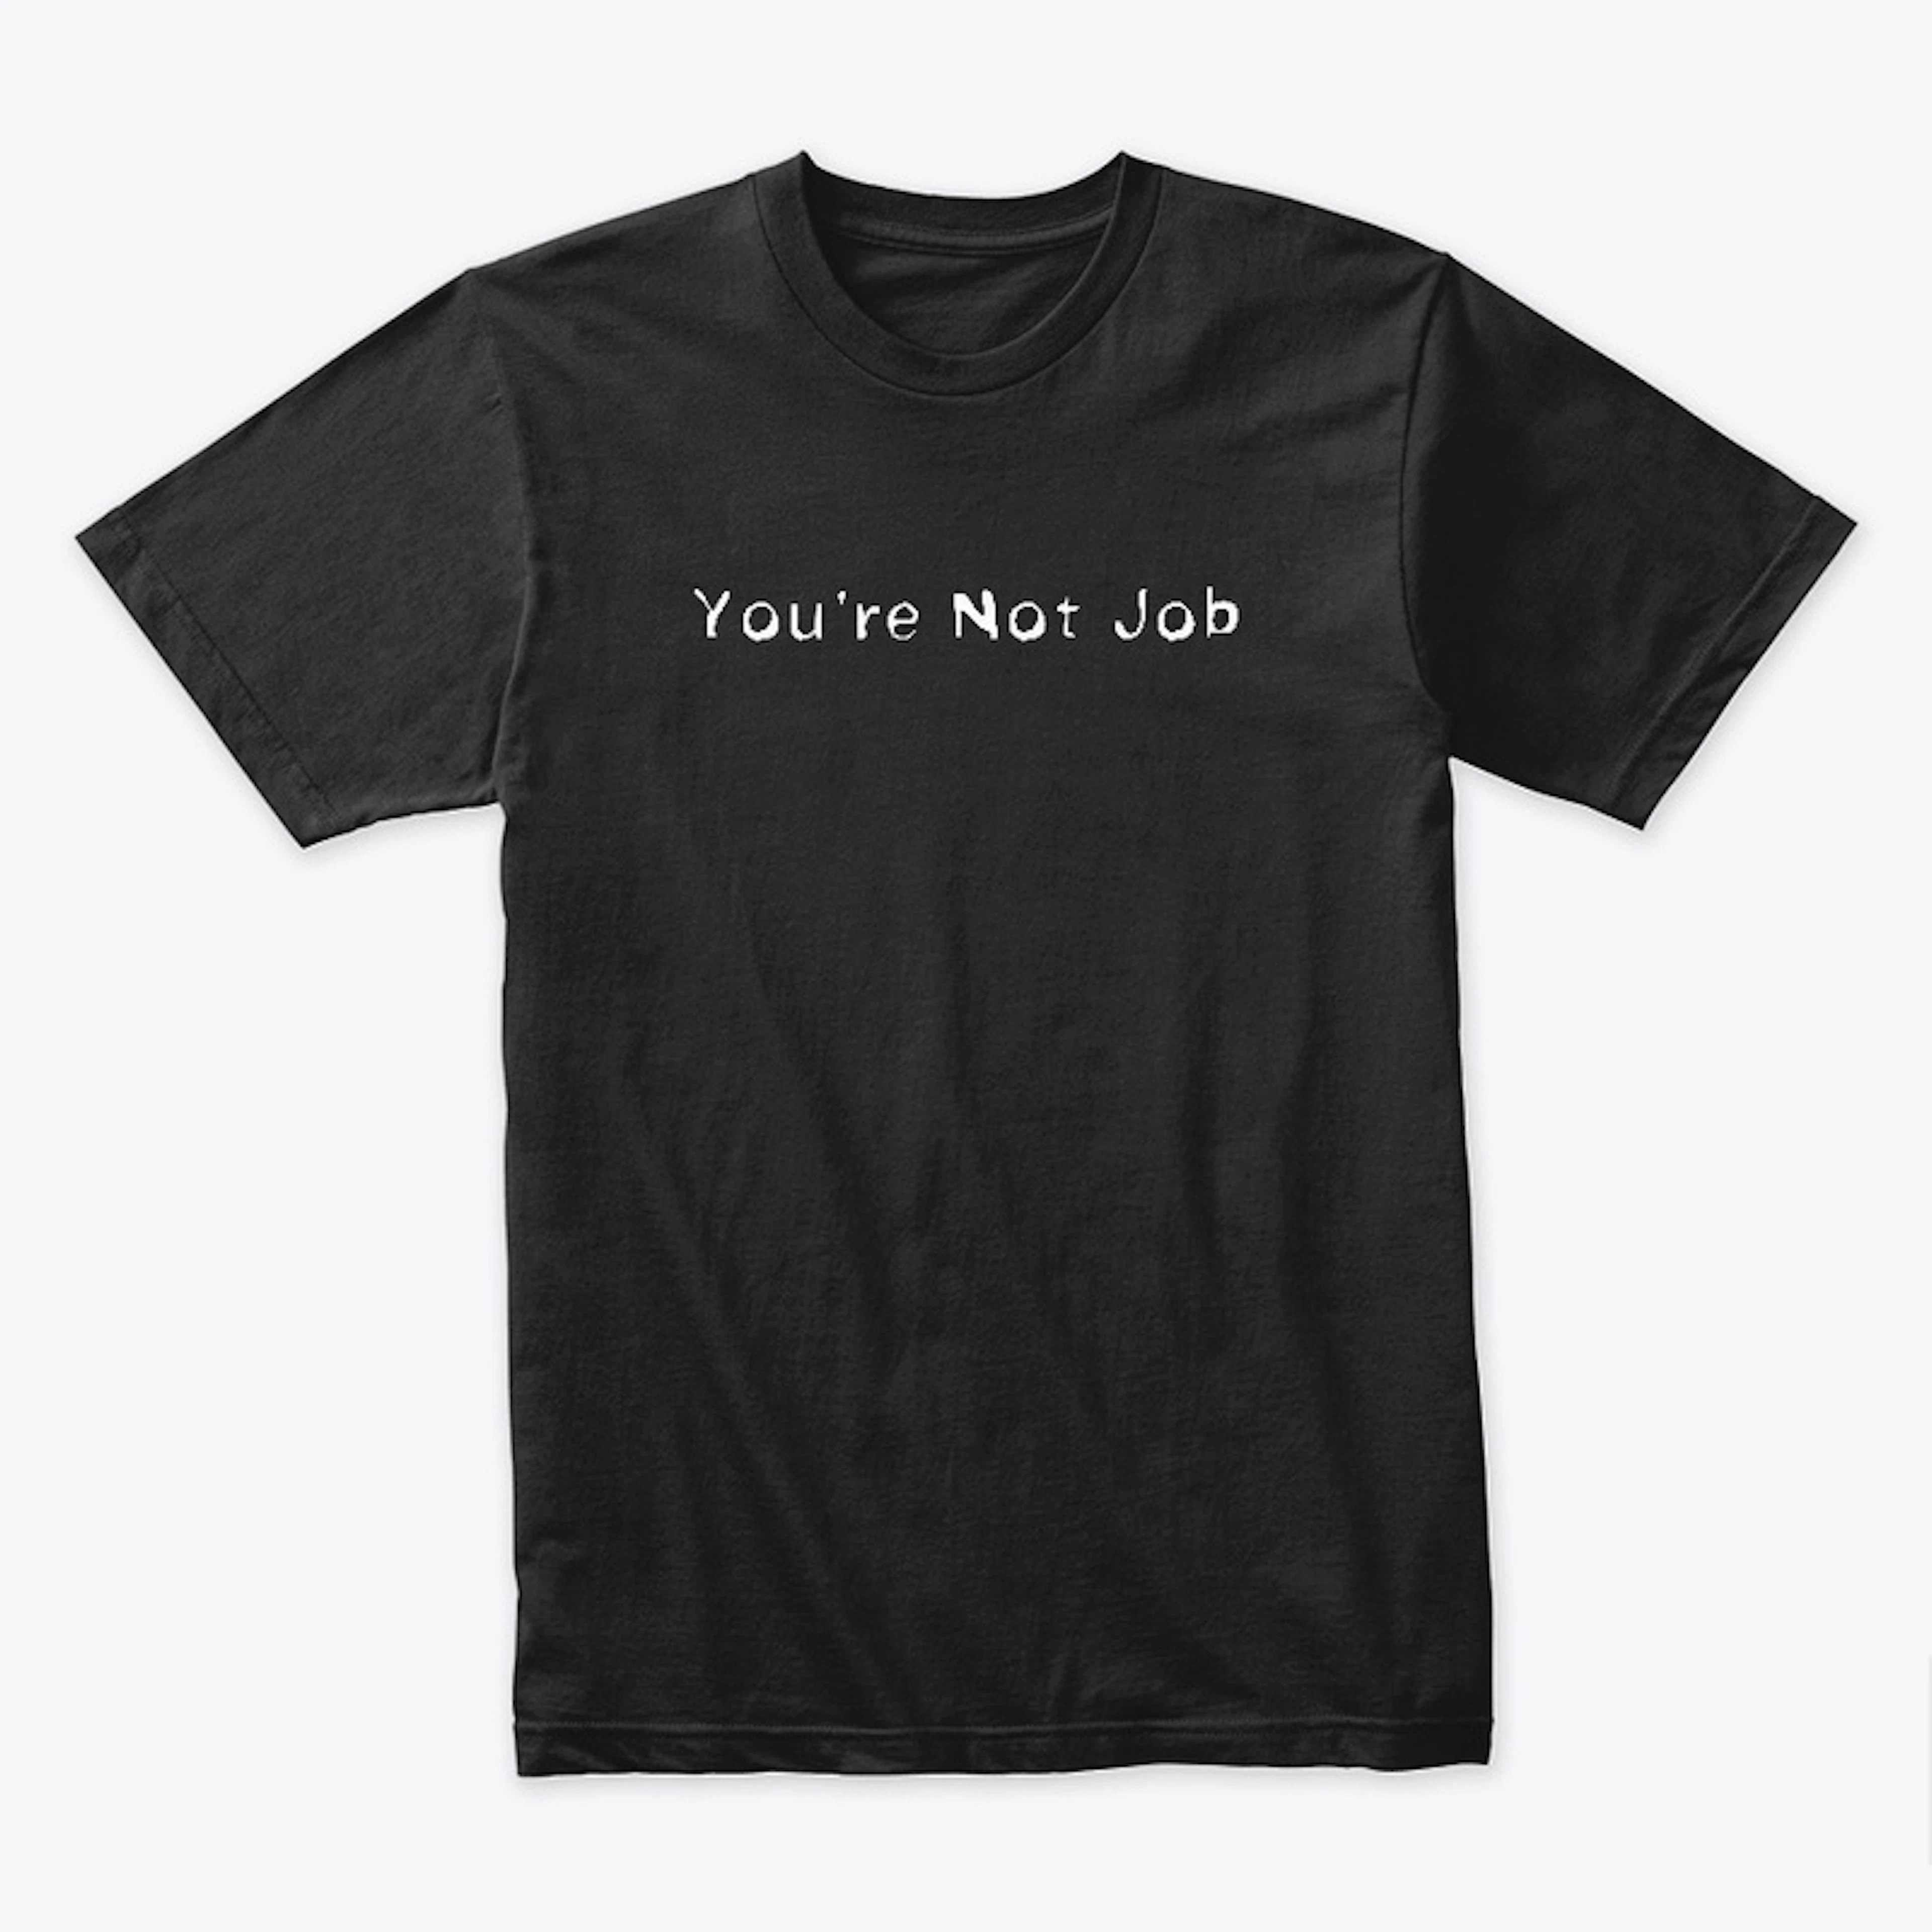 You're Not Job